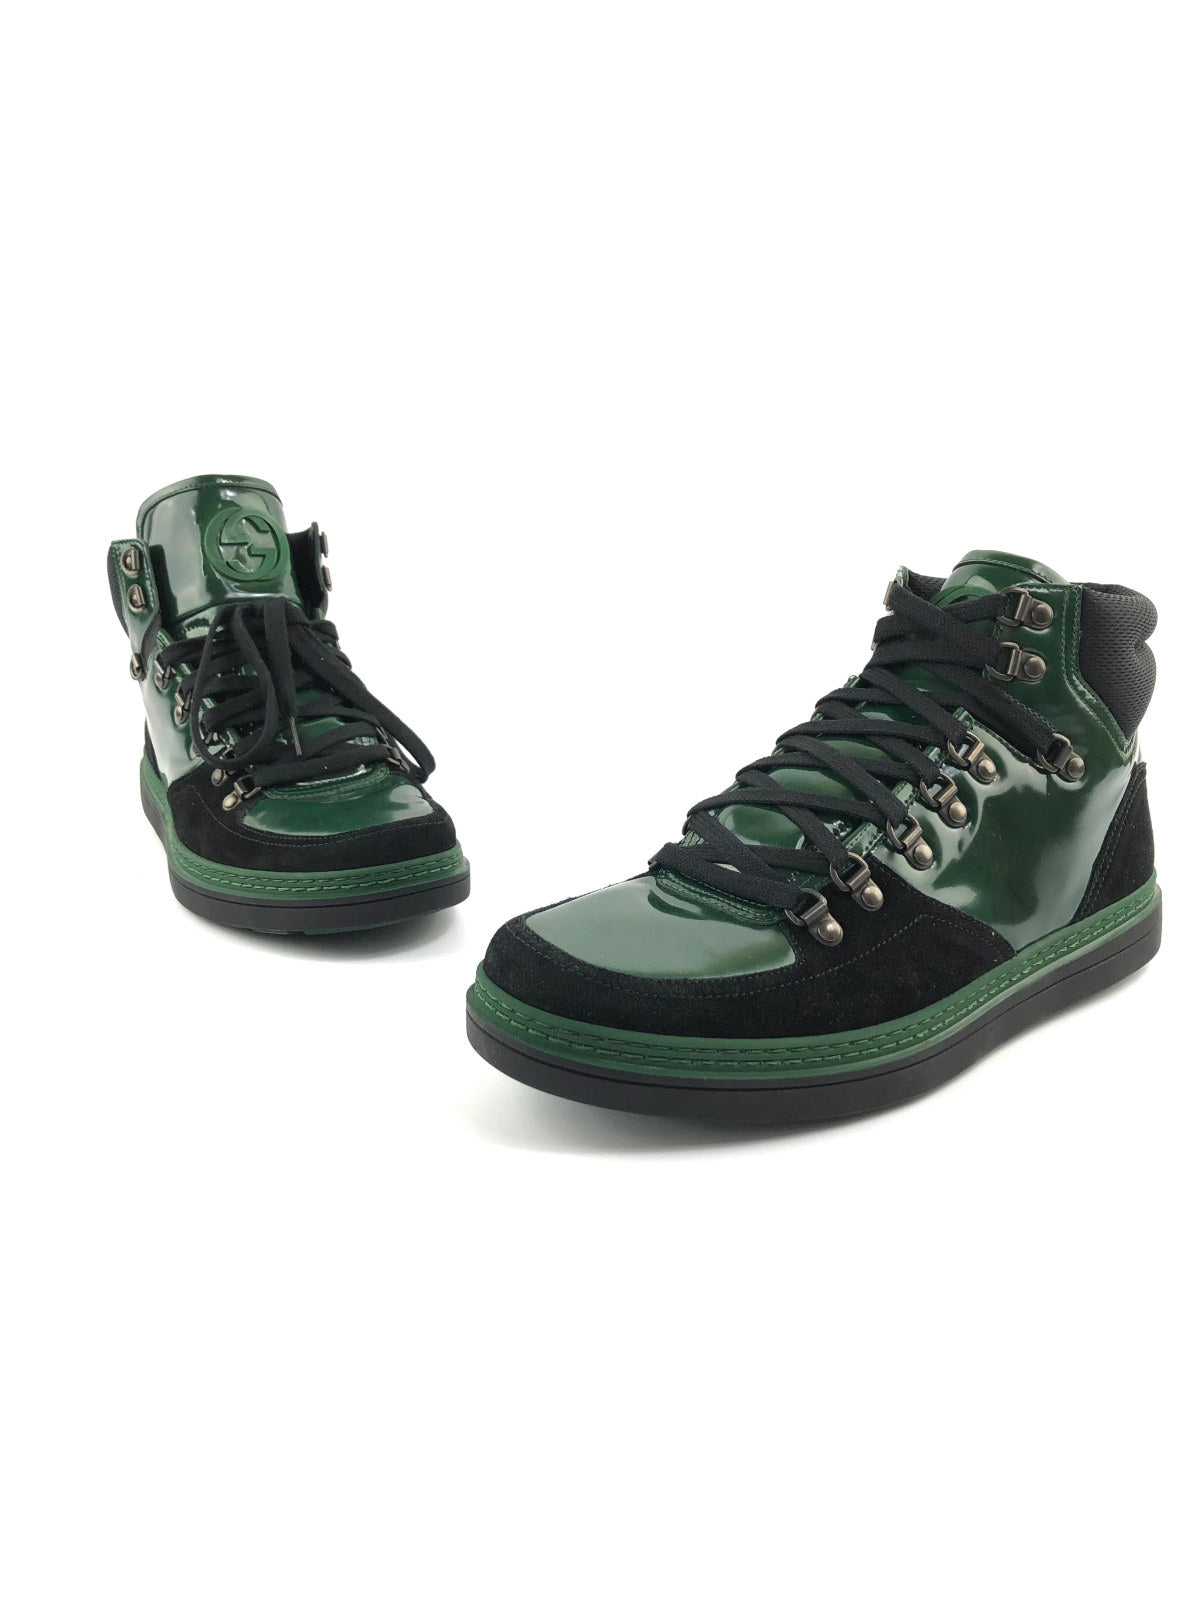 GUCCI Dark Green Suede Contrast Combo MENS High Top Sneakers Size 8